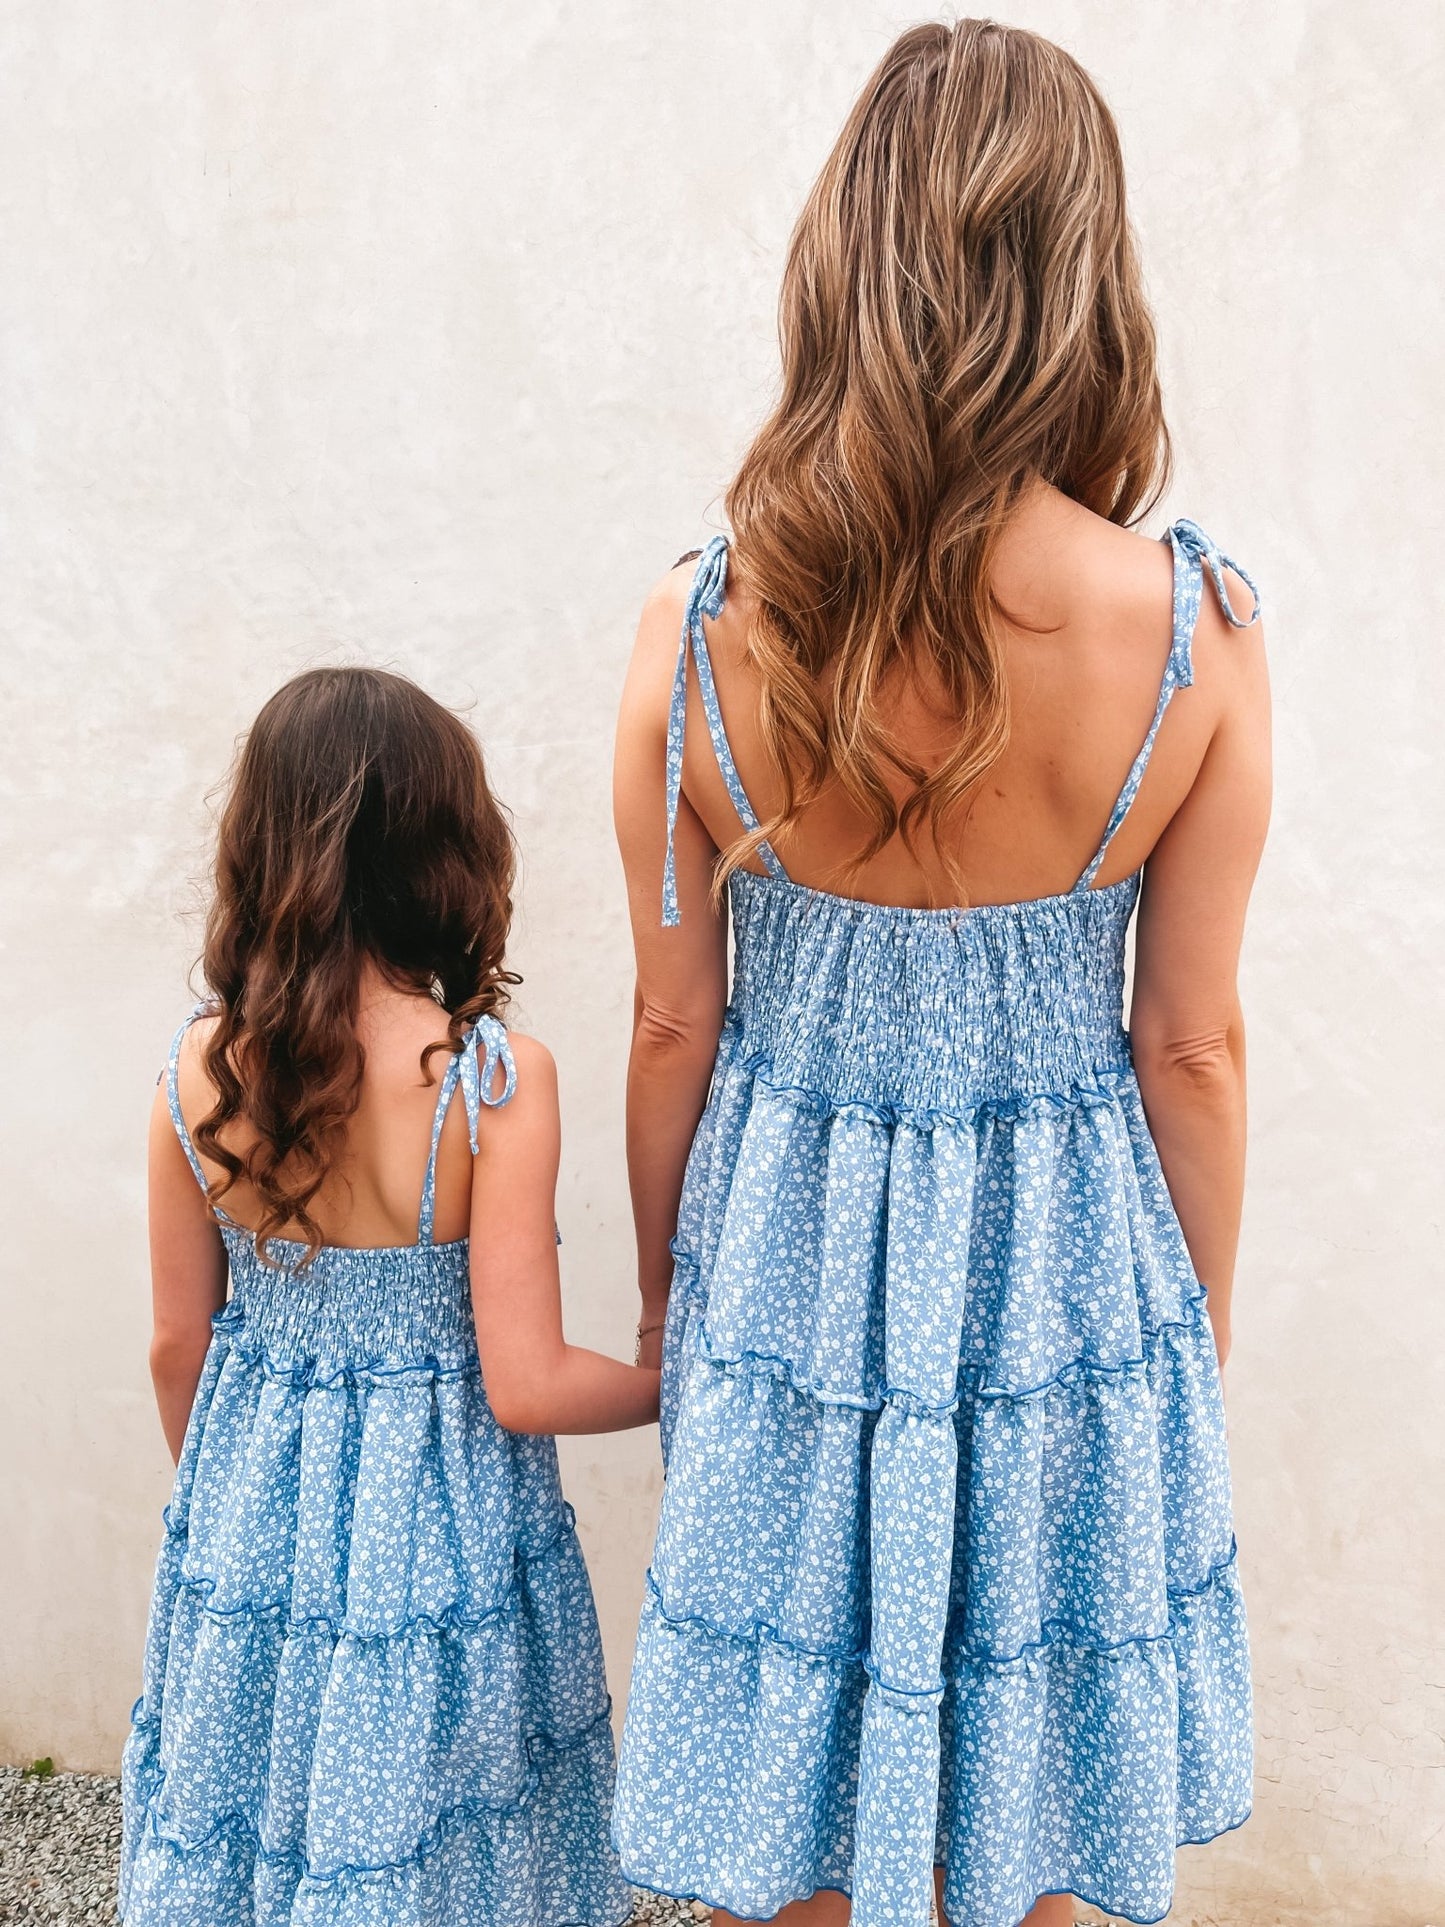 Darling Dusty Blue Mommy and Me Matching Dresses - LITTLE MIA BELLA